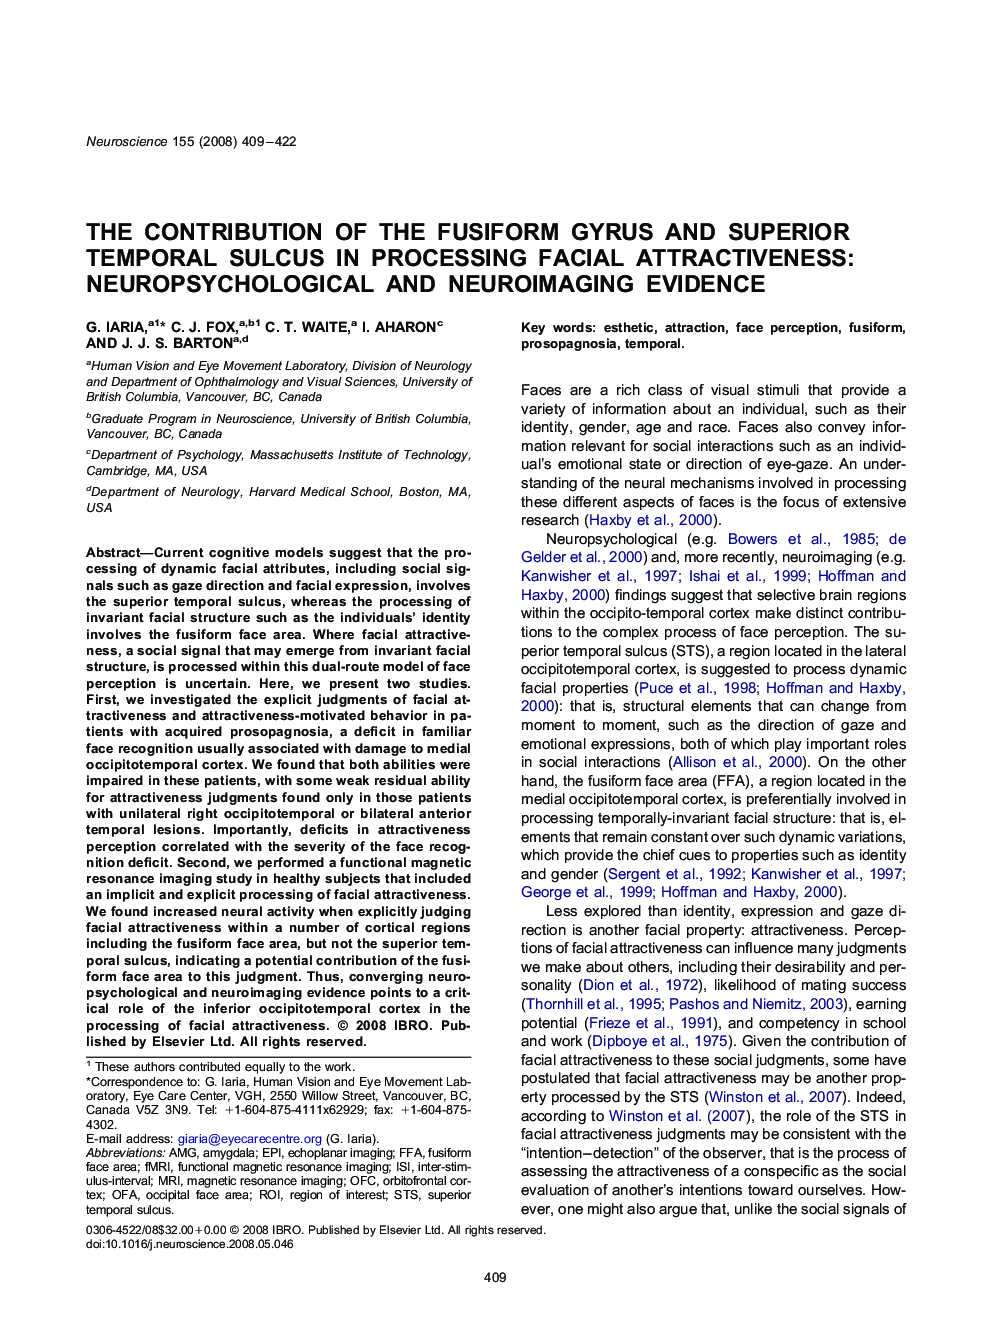 The contribution of the fusiform gyrus and superior temporal sulcus in processing facial attractiveness: Neuropsychological and neuroimaging evidence